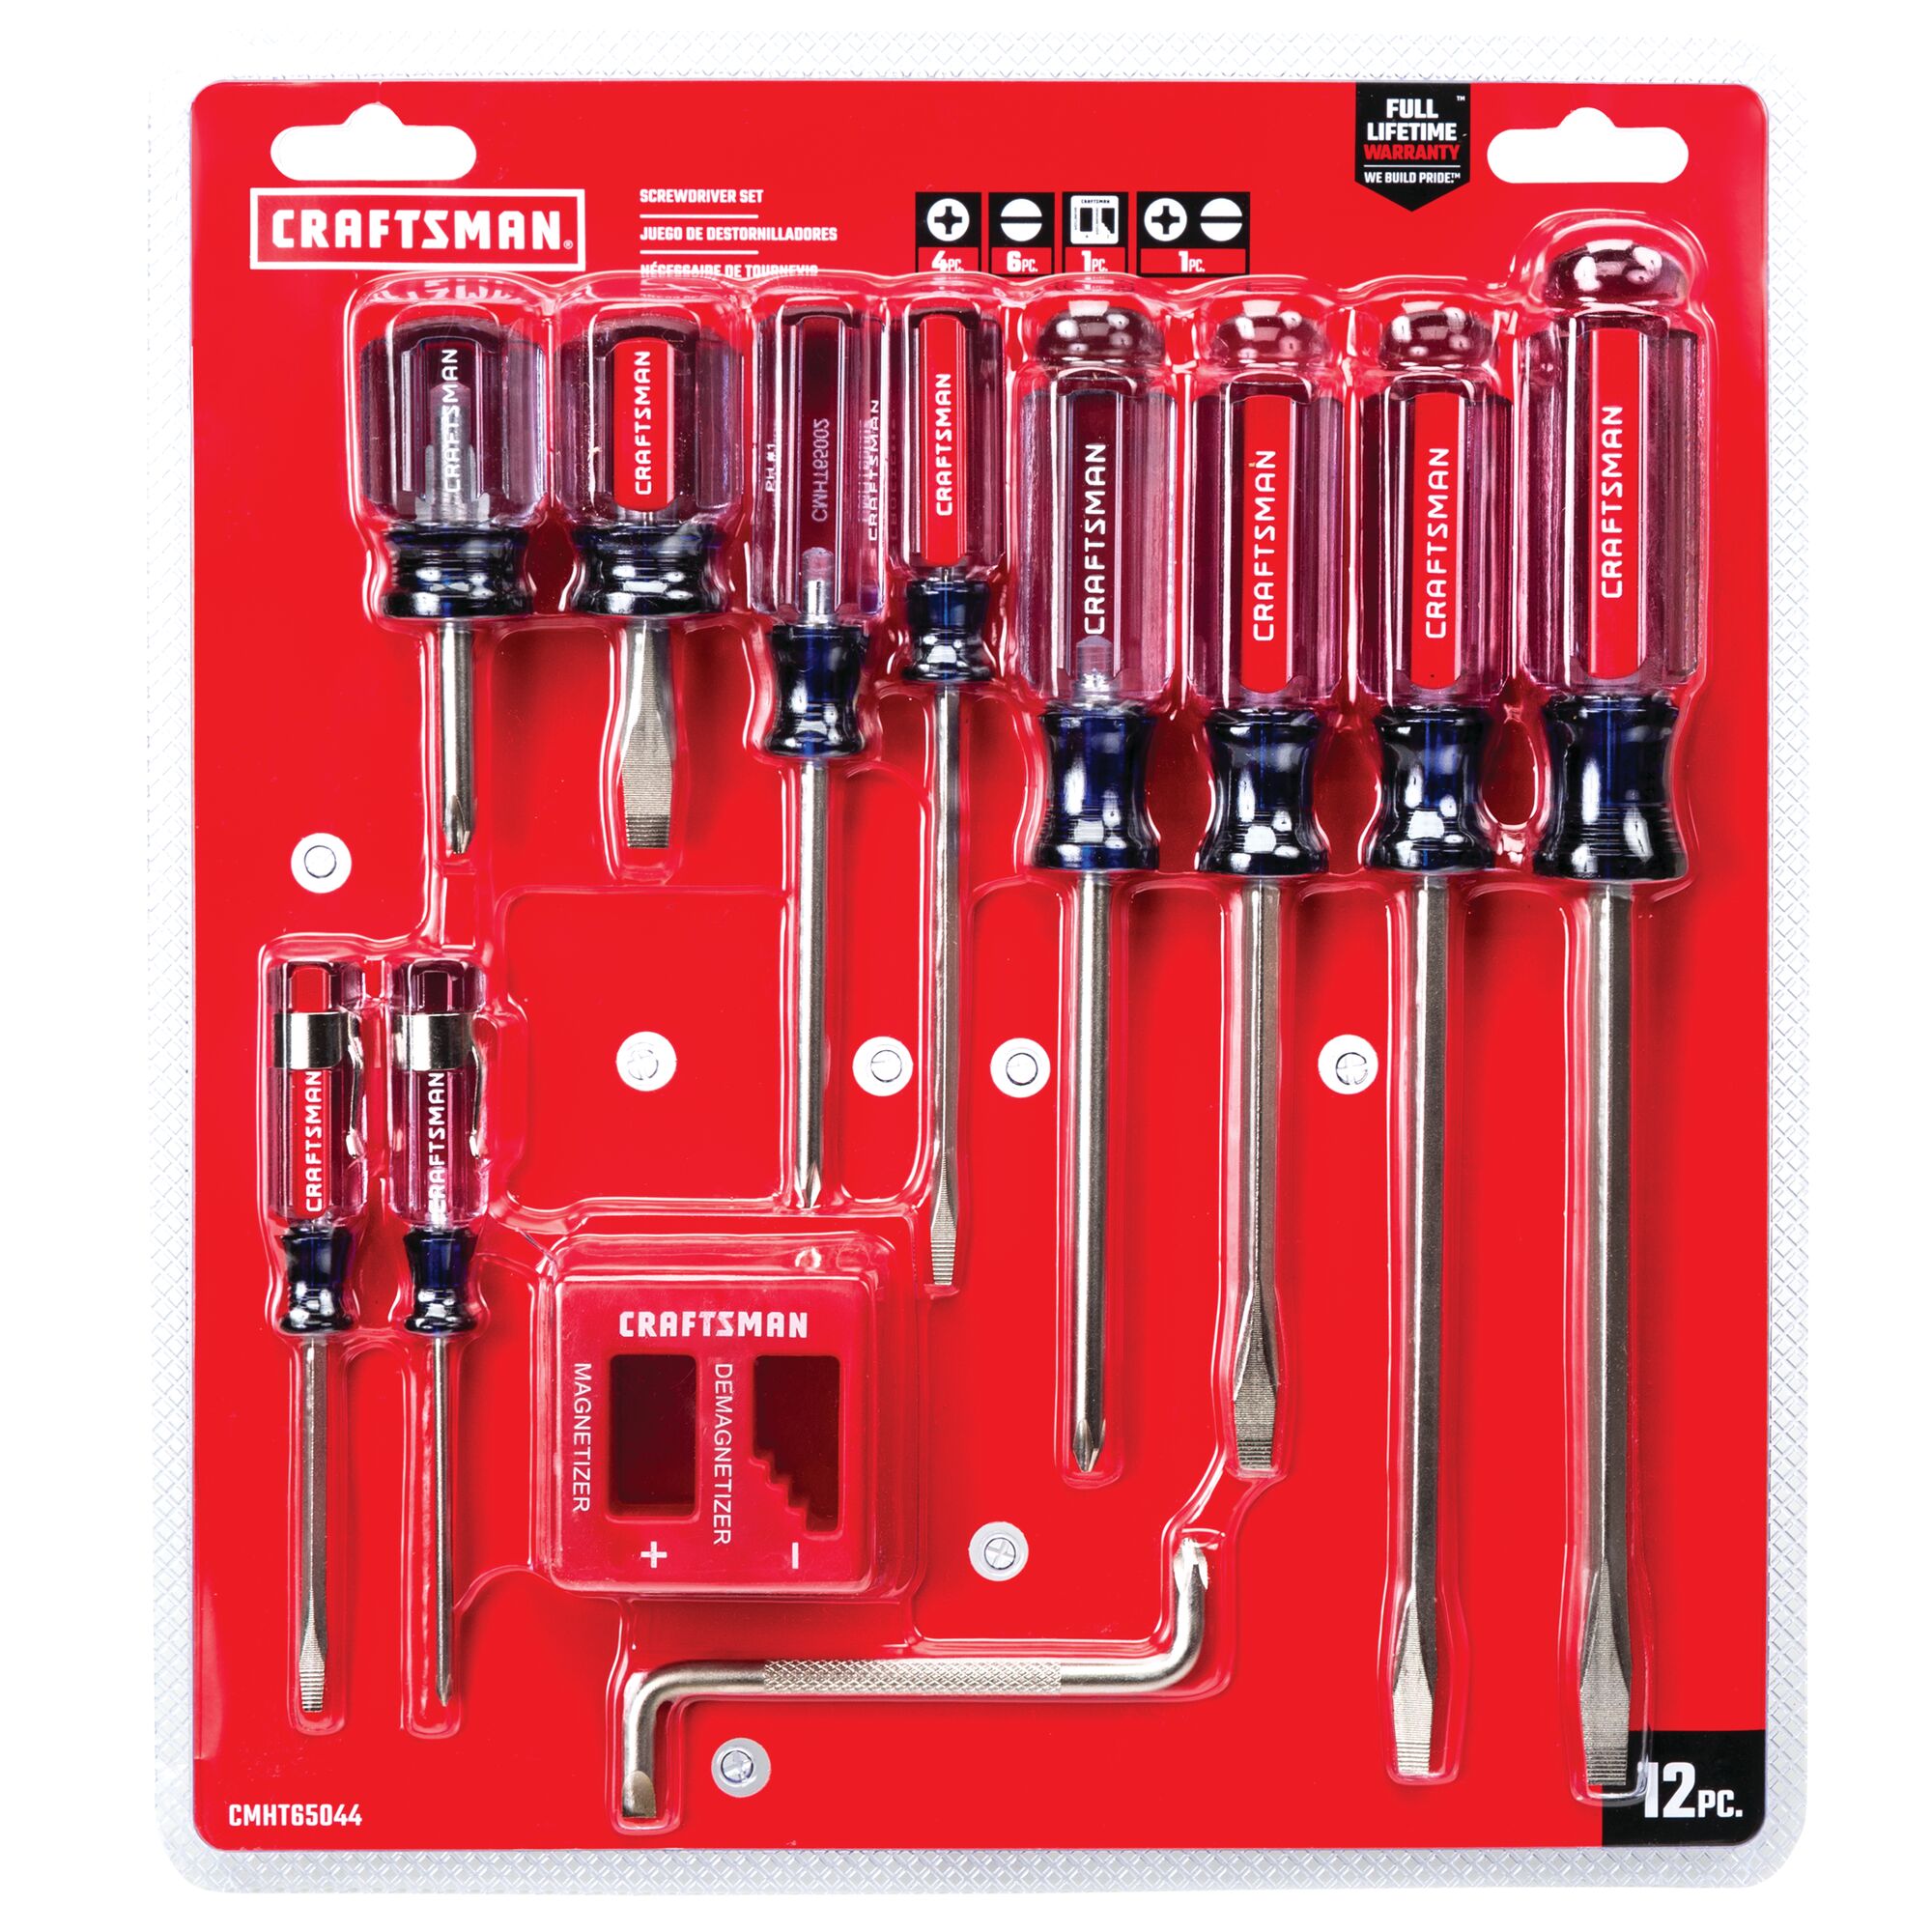 12 Piece Acetate ScrewDriver Set in carded blister packaging.